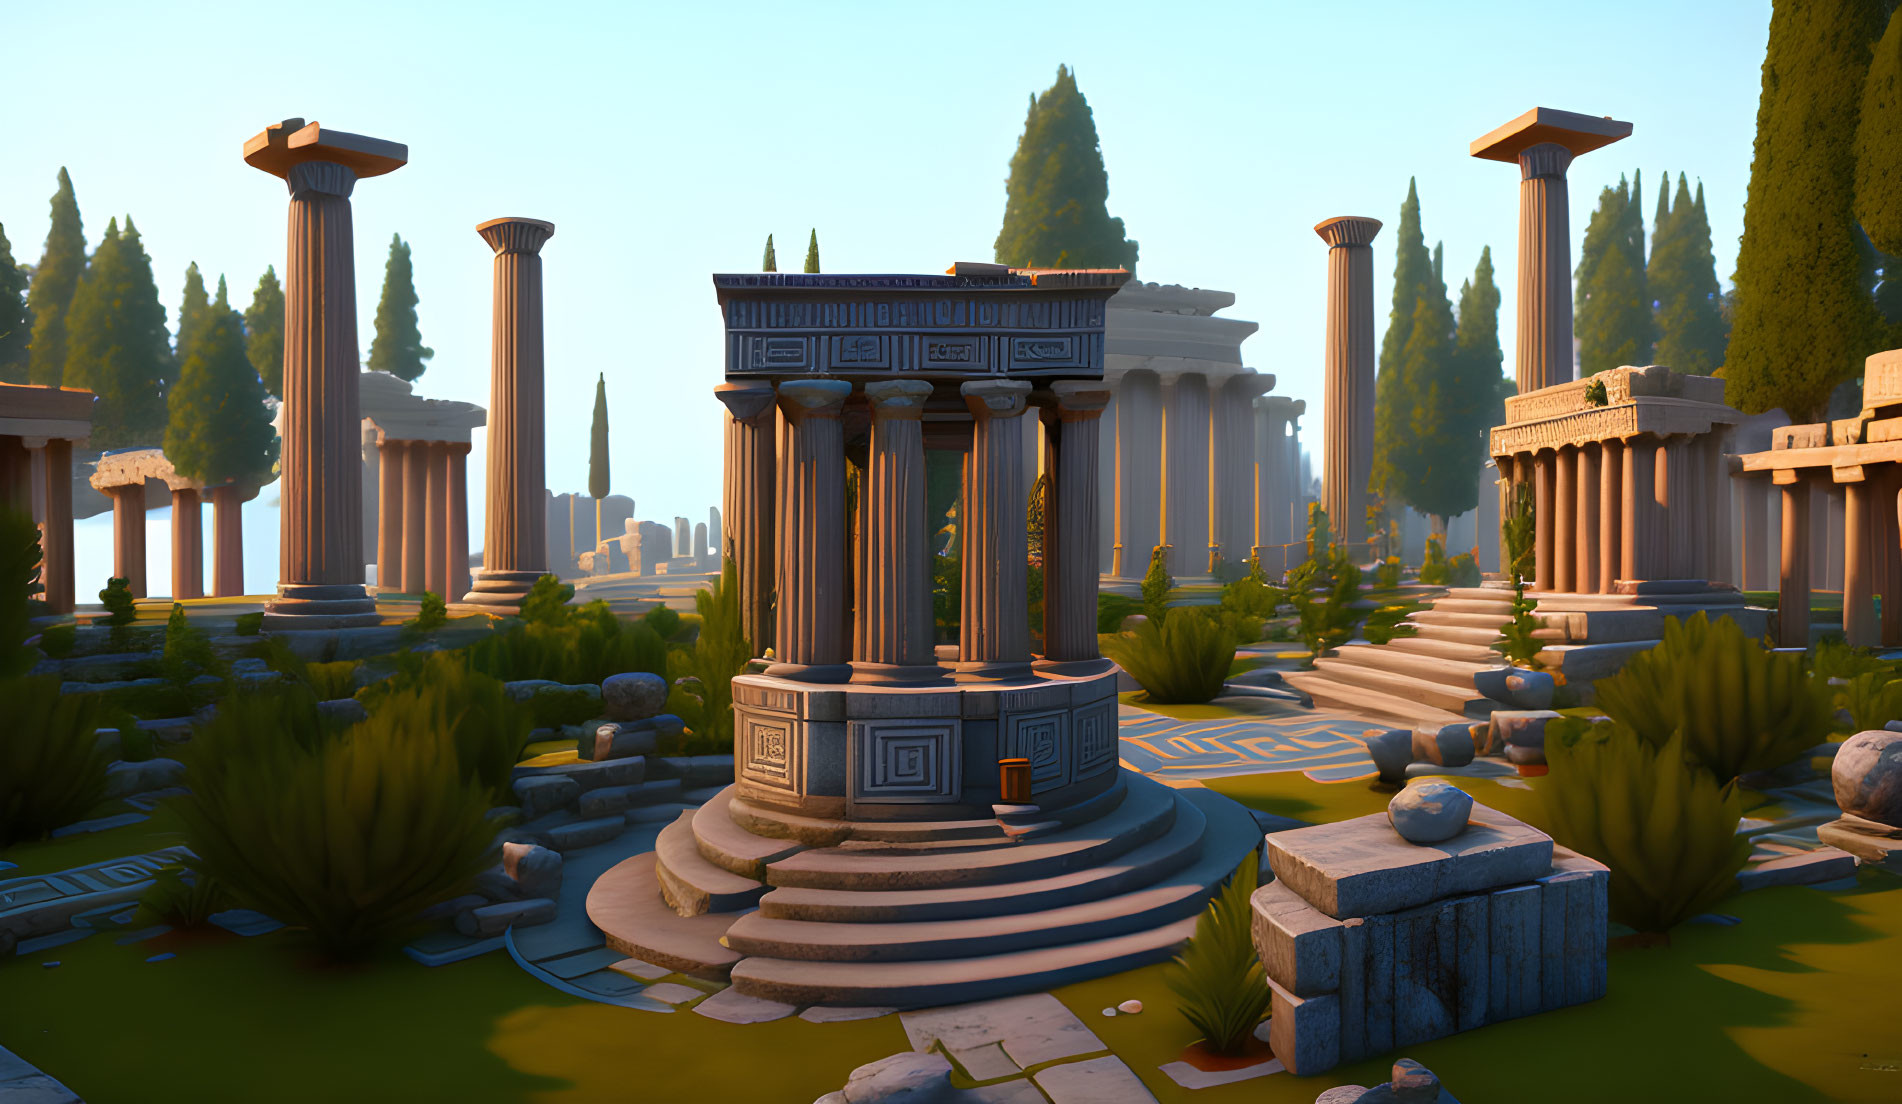 Stylized garden with Greek architecture and green shrubbery